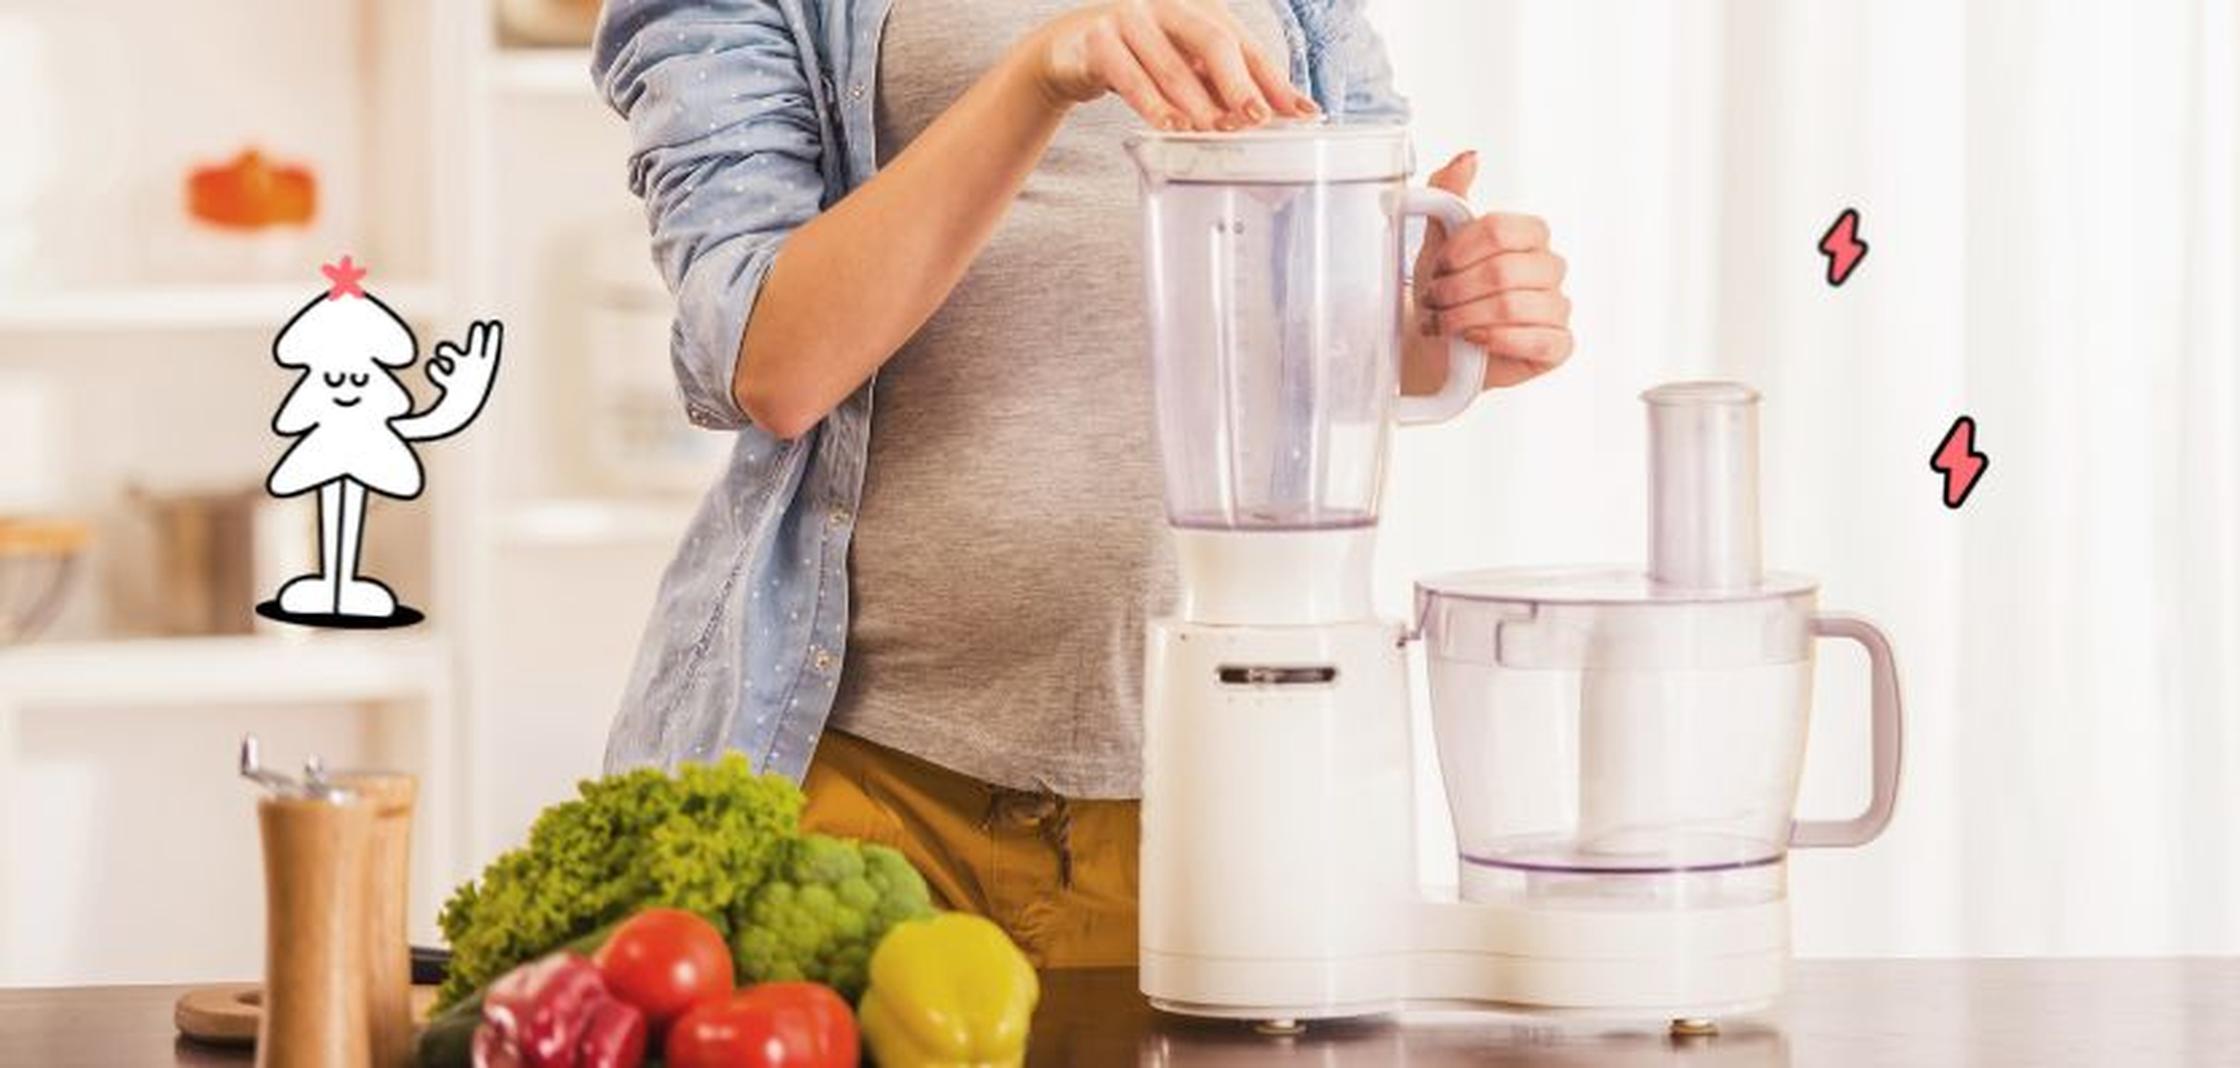 Food processor as a Christmas gift for mum